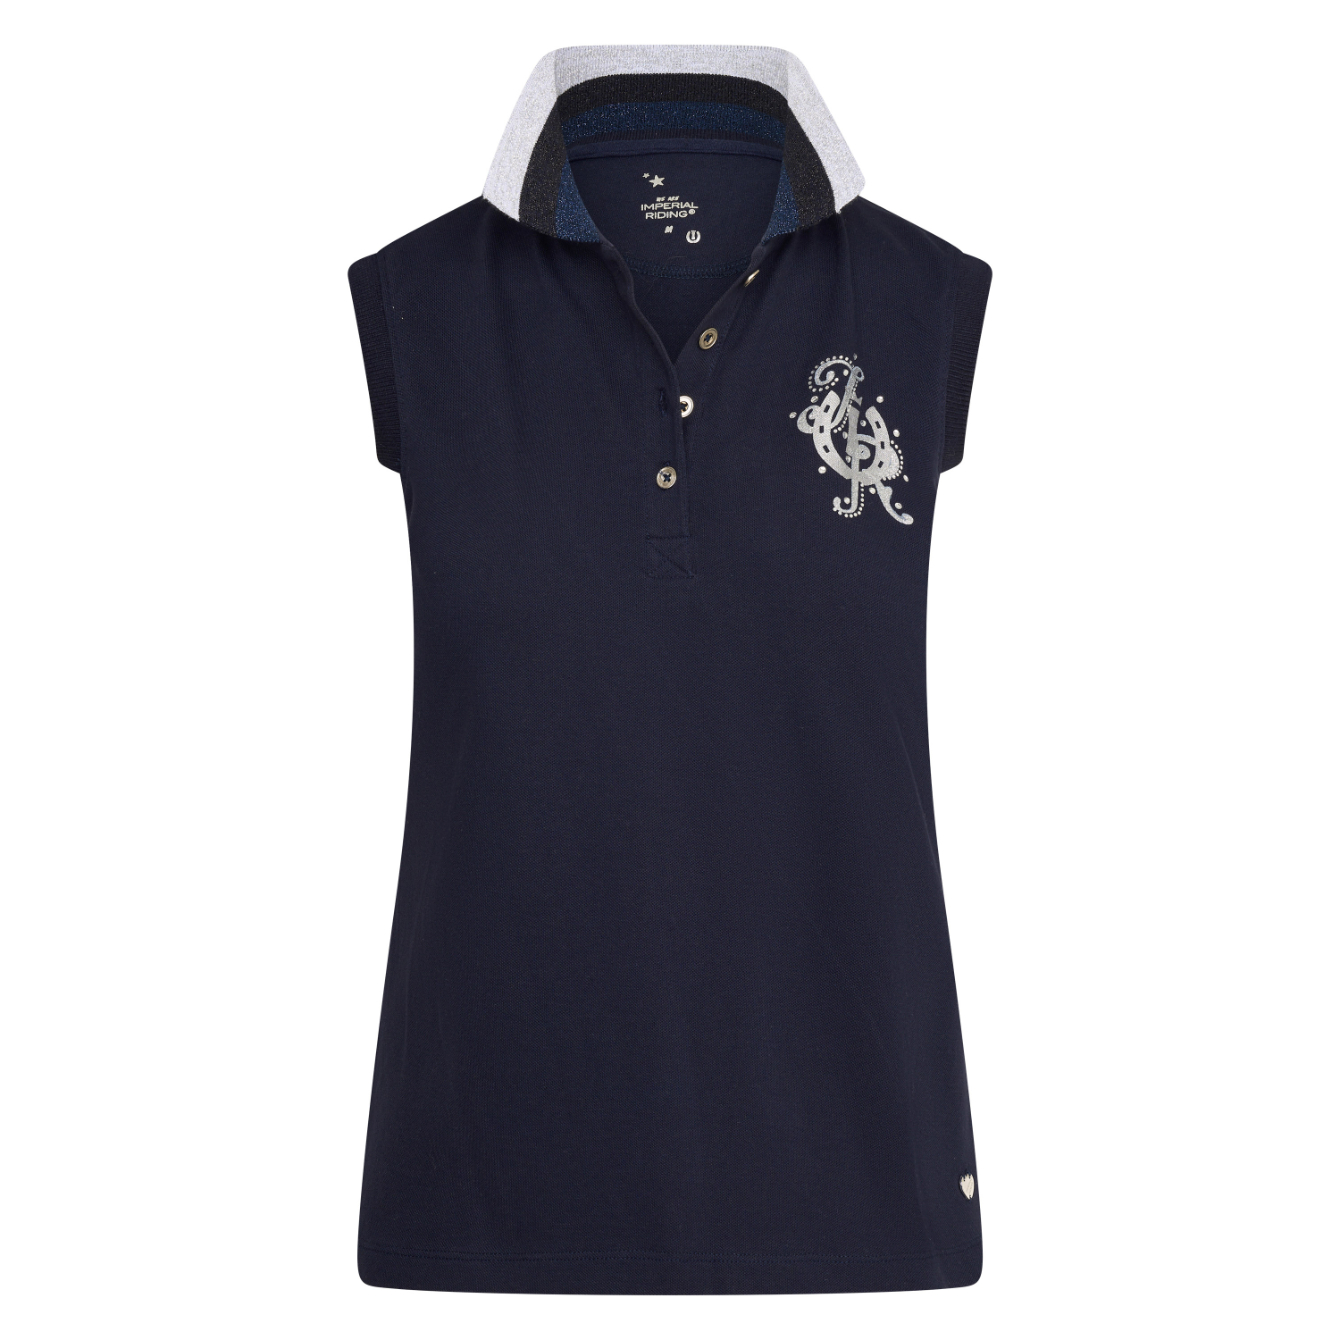 Afbeelding van Imperial Riding Polo shirt mouwloos irhfrenzie